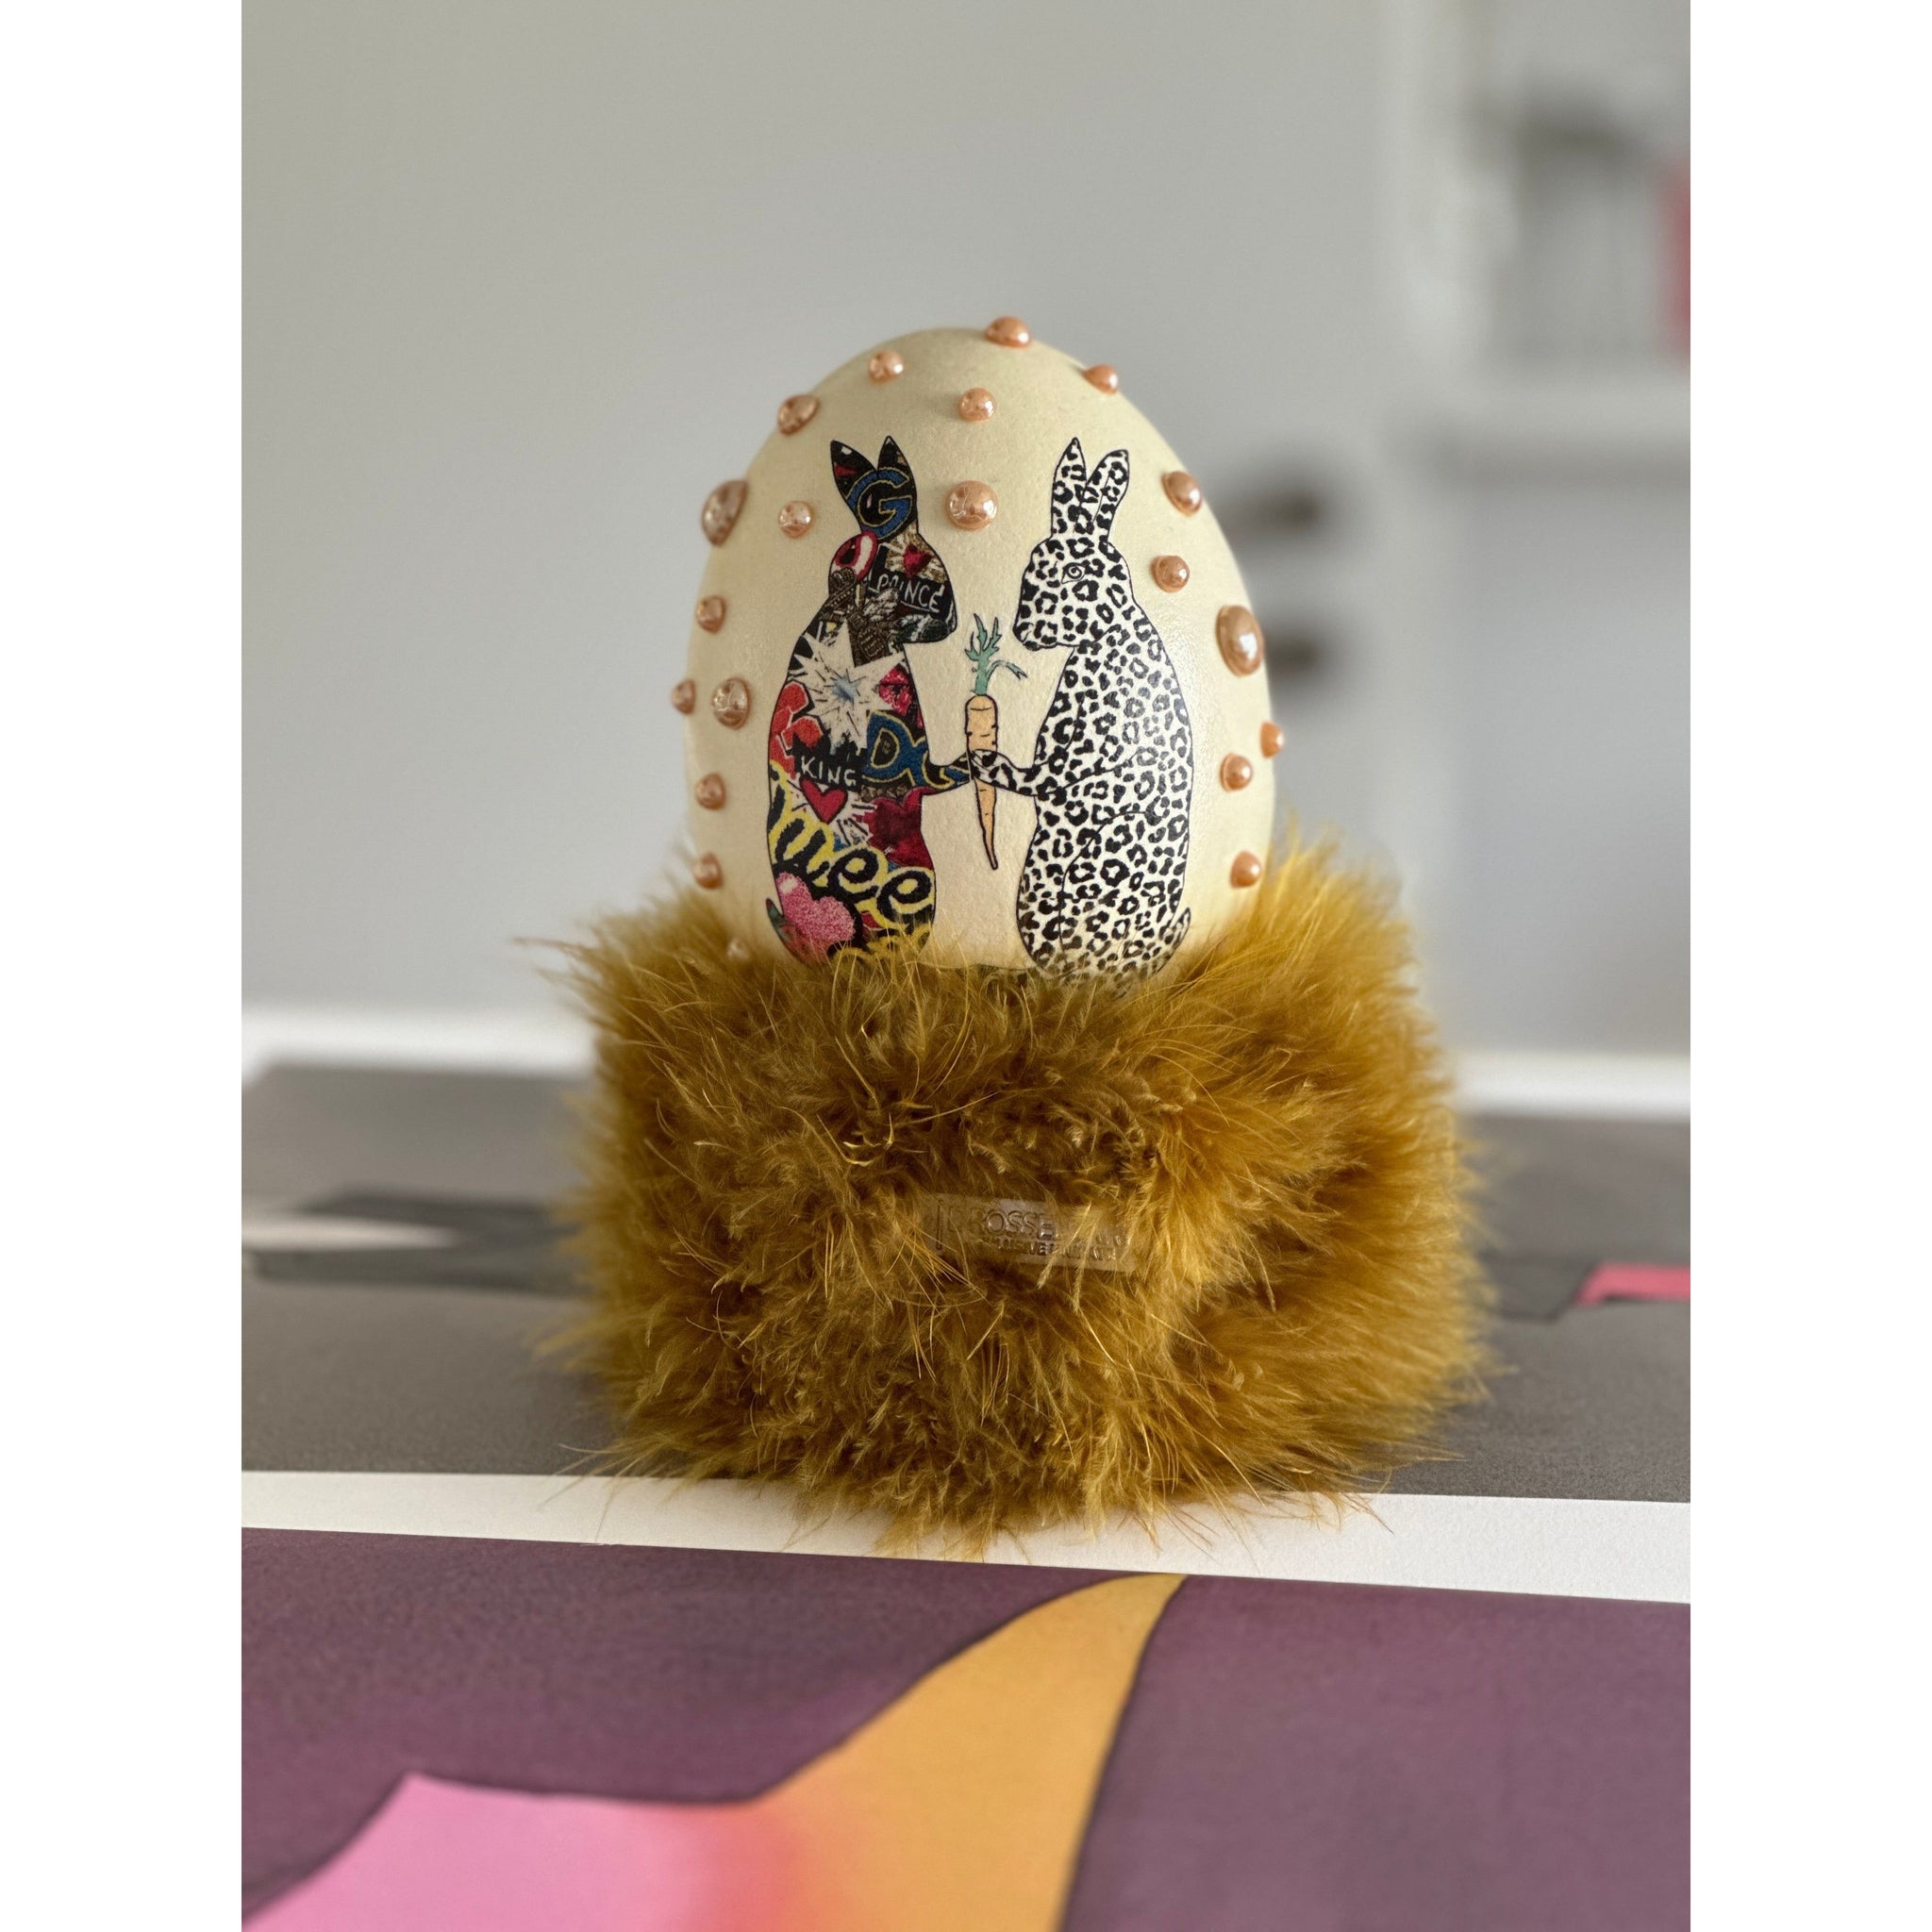 Nanduei "Dolce Carrot", including feather throne